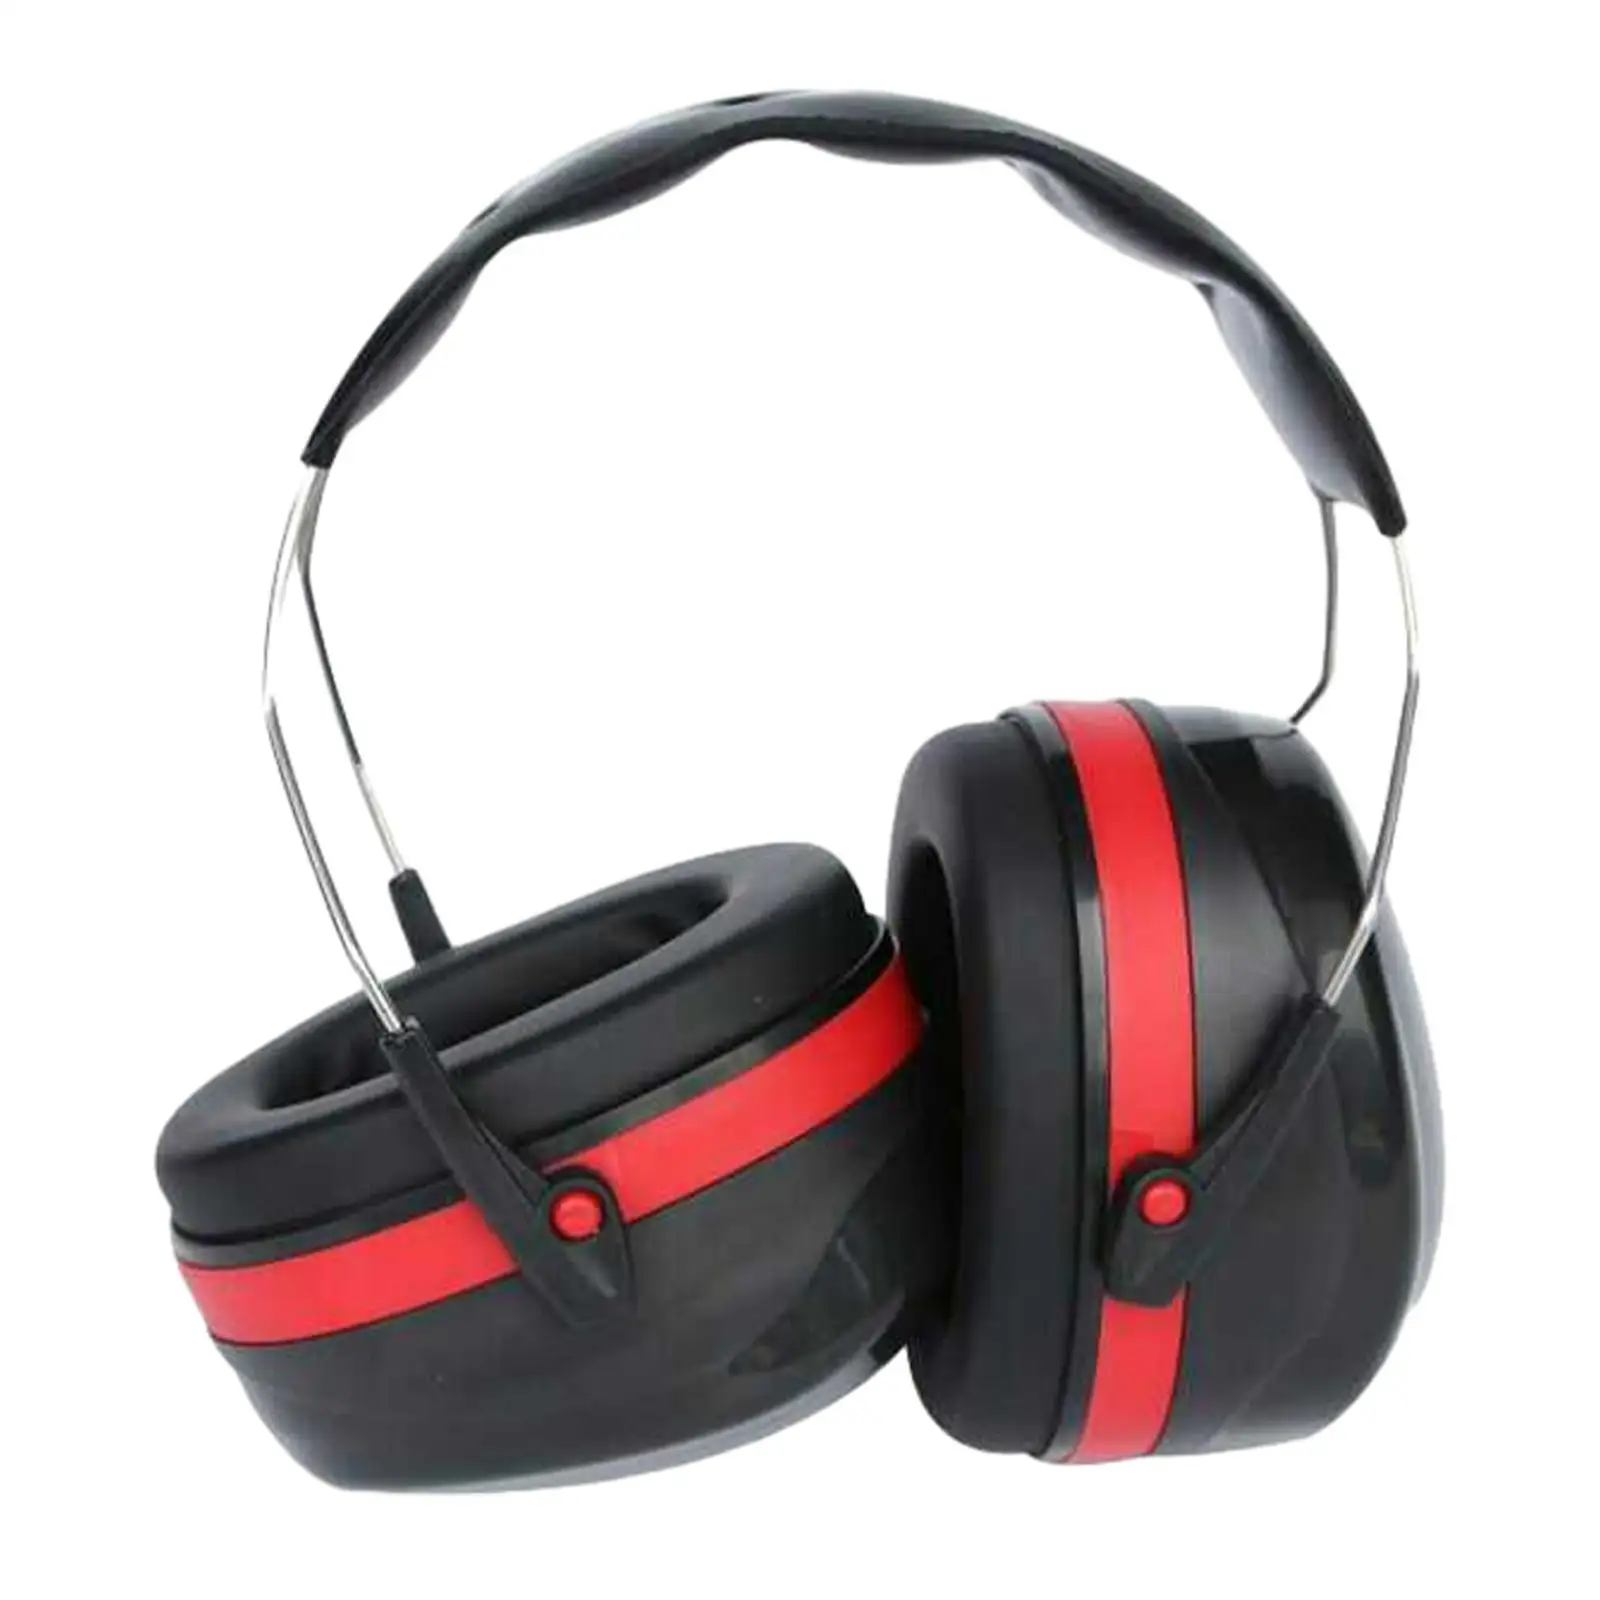 Noise Reduction Headphones Mute Soundproof No Pressure to Wear Safety Ear Muffs for Woodwork Sleeping Mowing Lawn Teens